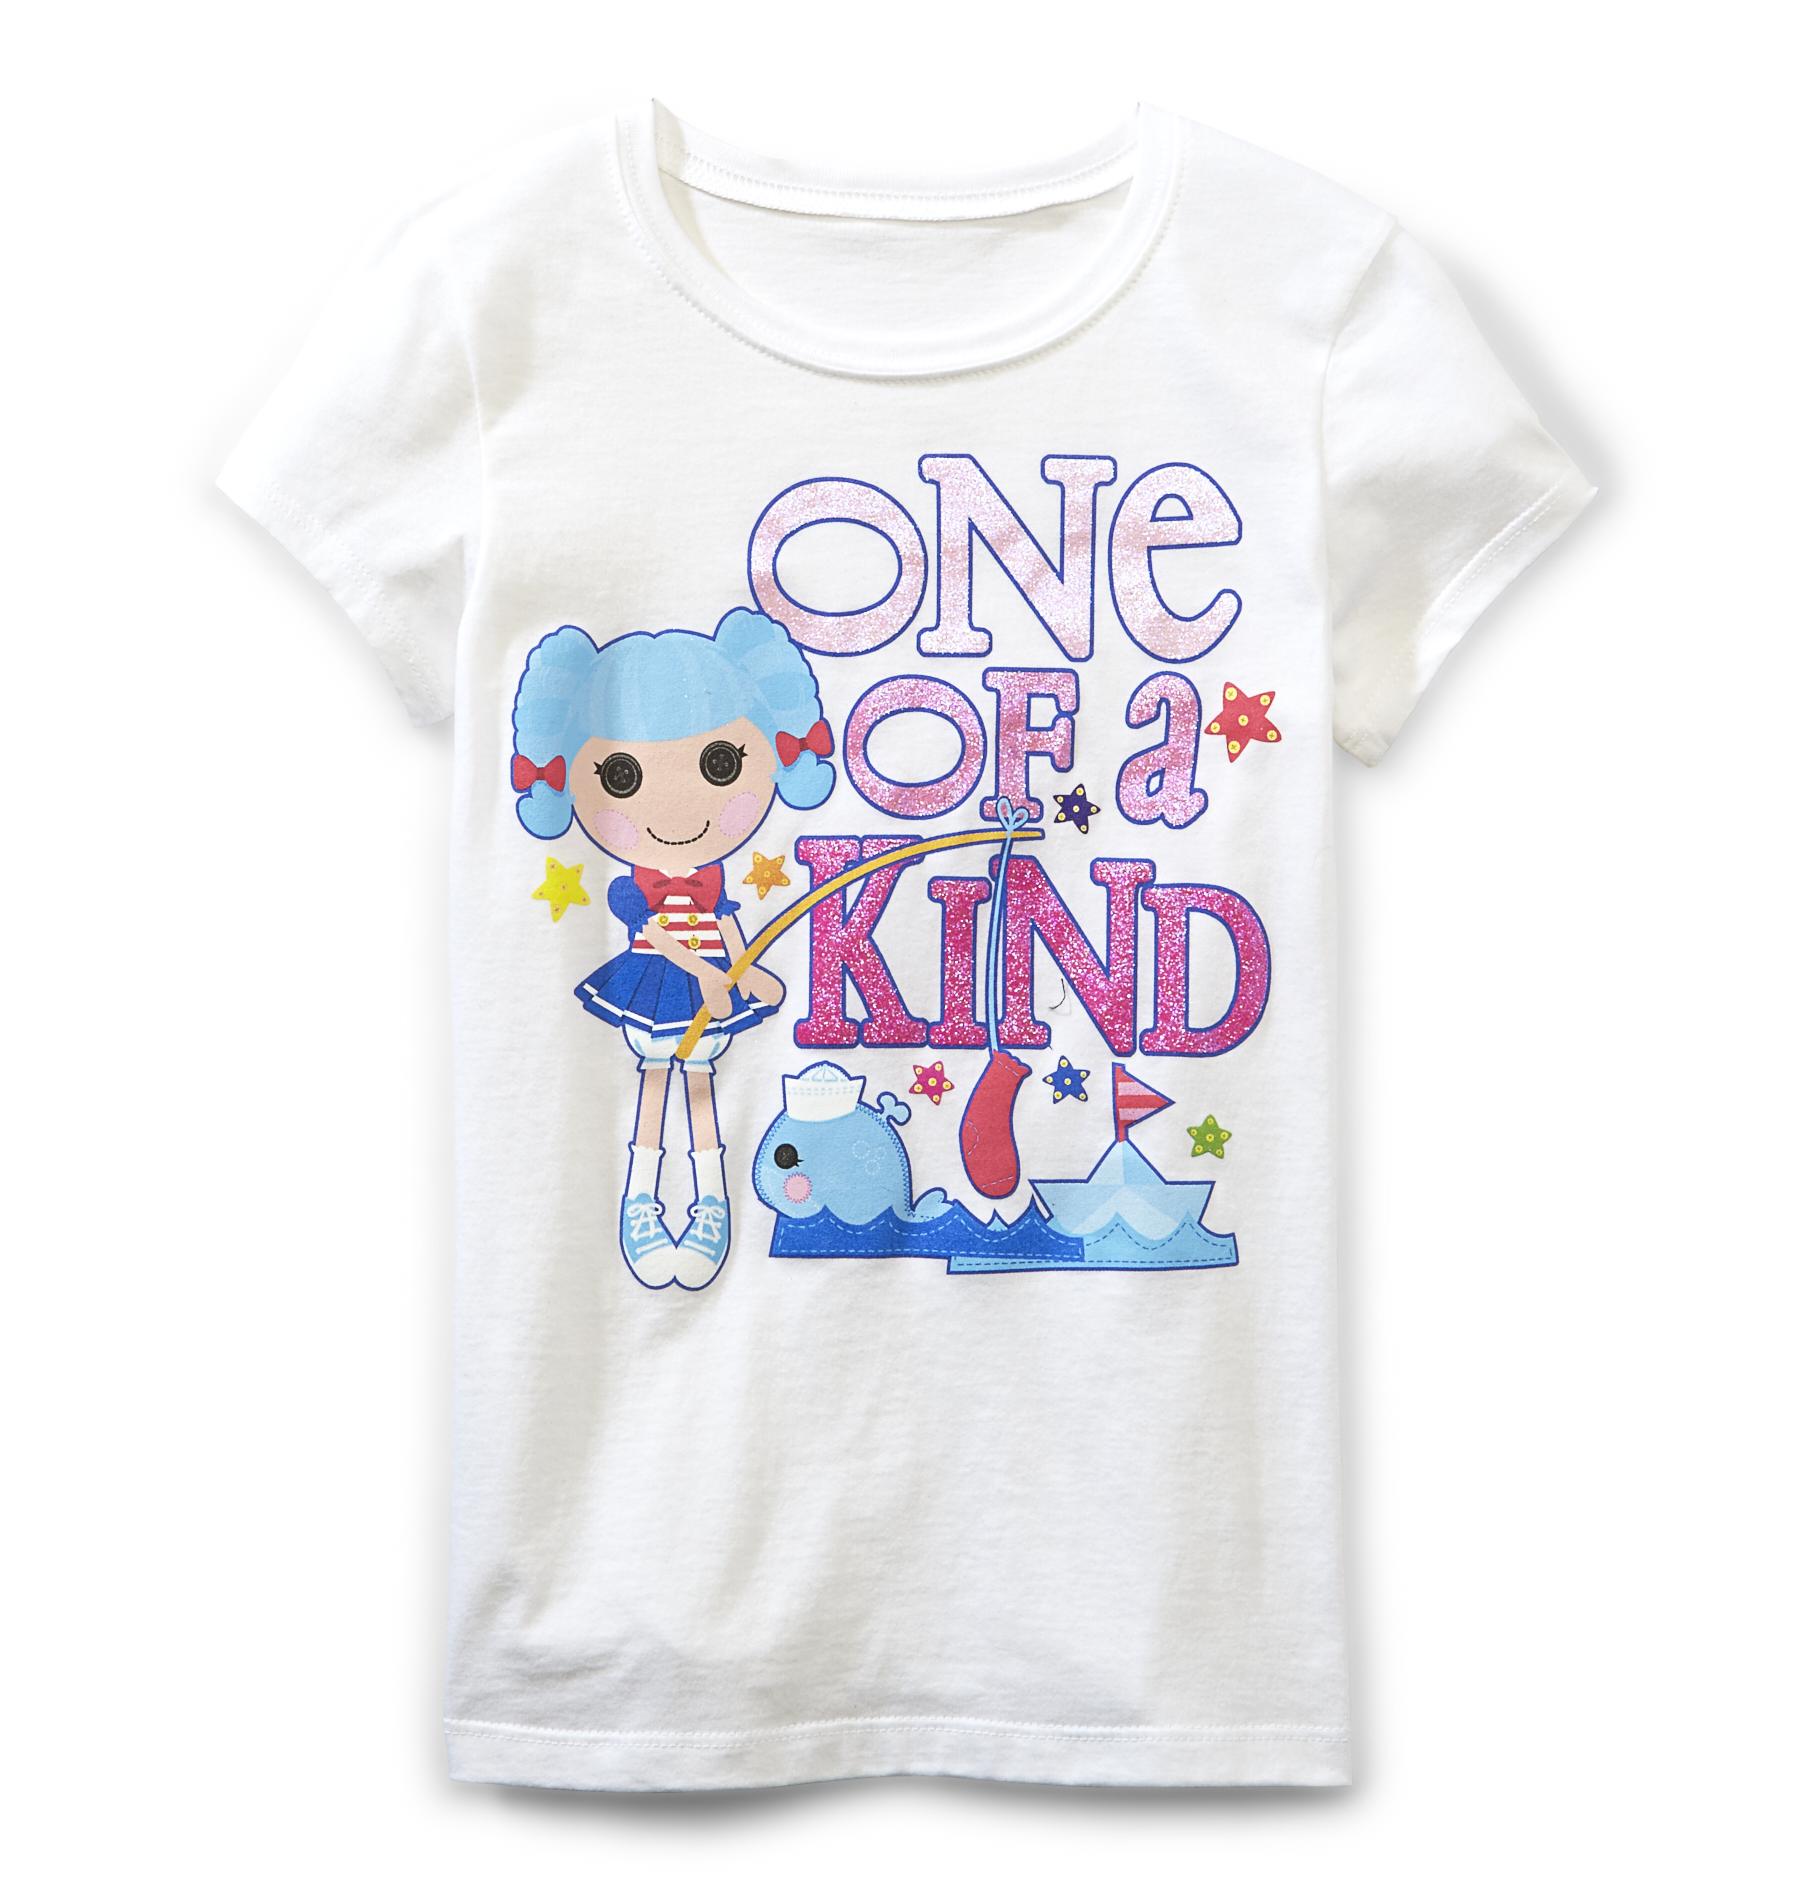 Lalaloopsy Girl's Graphic T-Shirt - One of a Kind